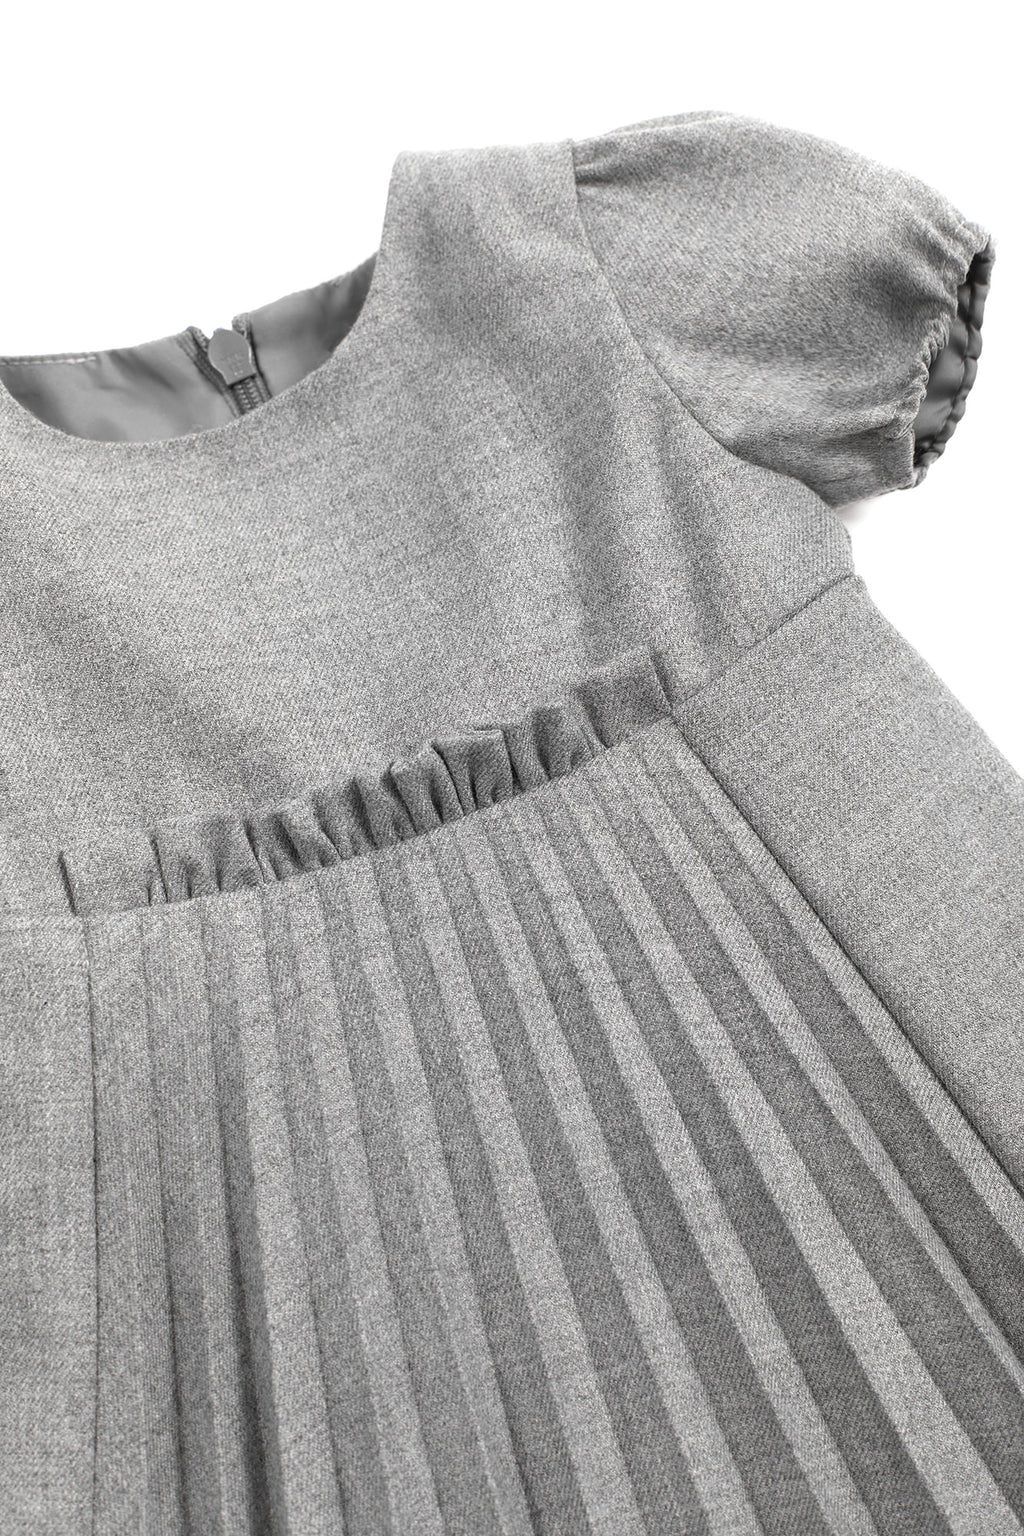 Dress - Grey China Flannel pleated